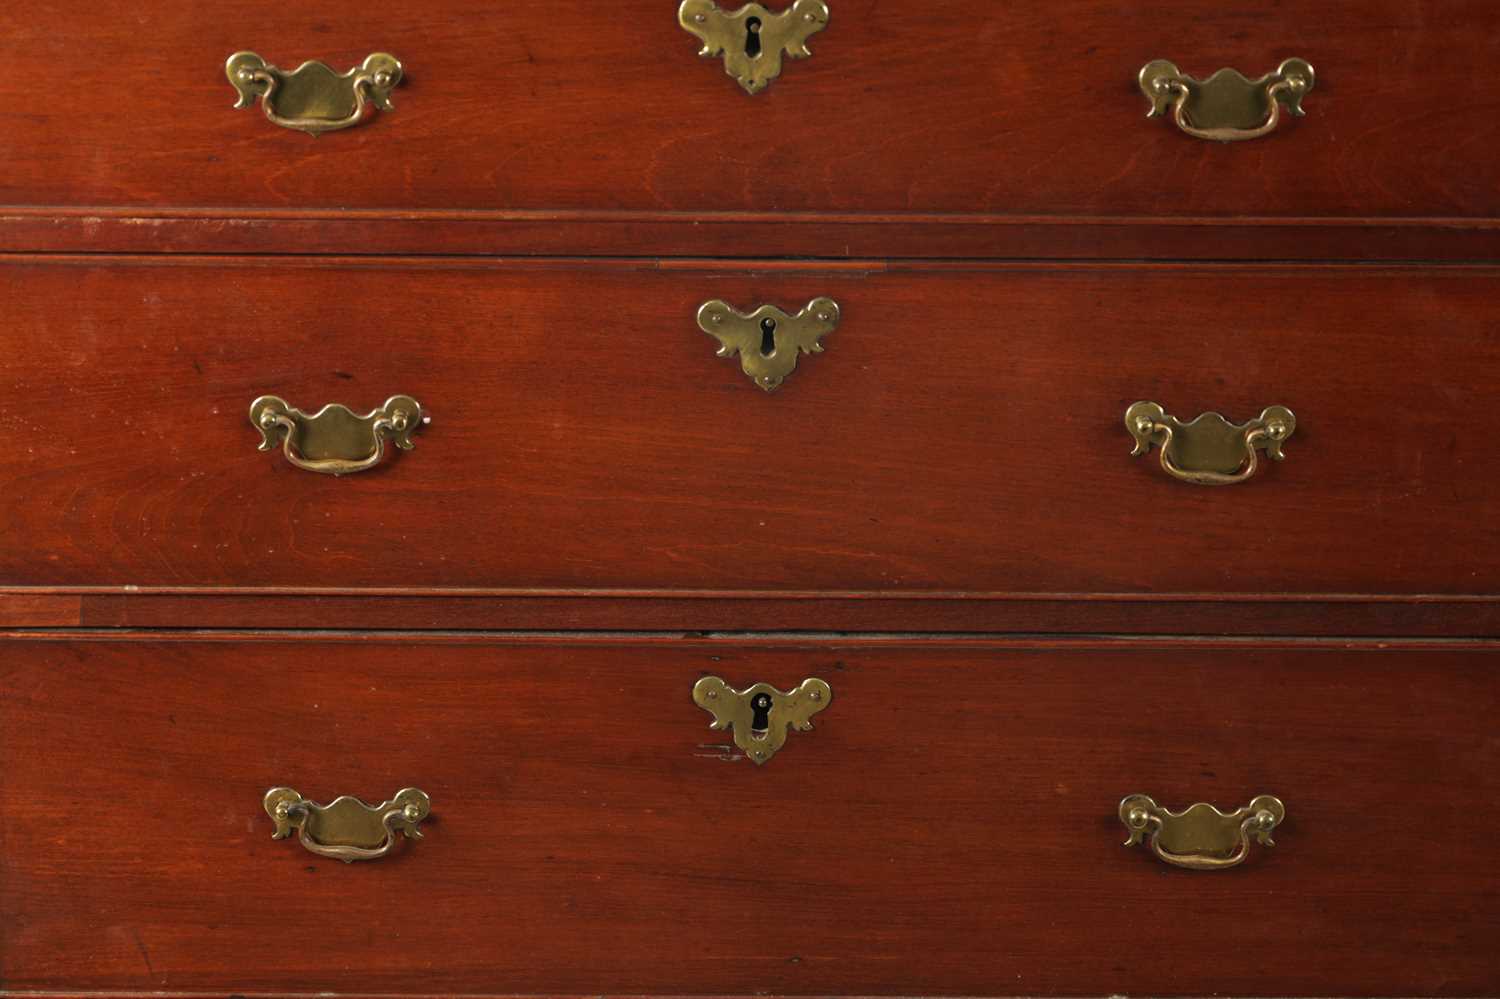 AN UNUSUAL AND RARE EARLY 18TH CENTURY RED WALNUT CHEST ON STAND POSSIBLY AMERICAN - Image 5 of 7